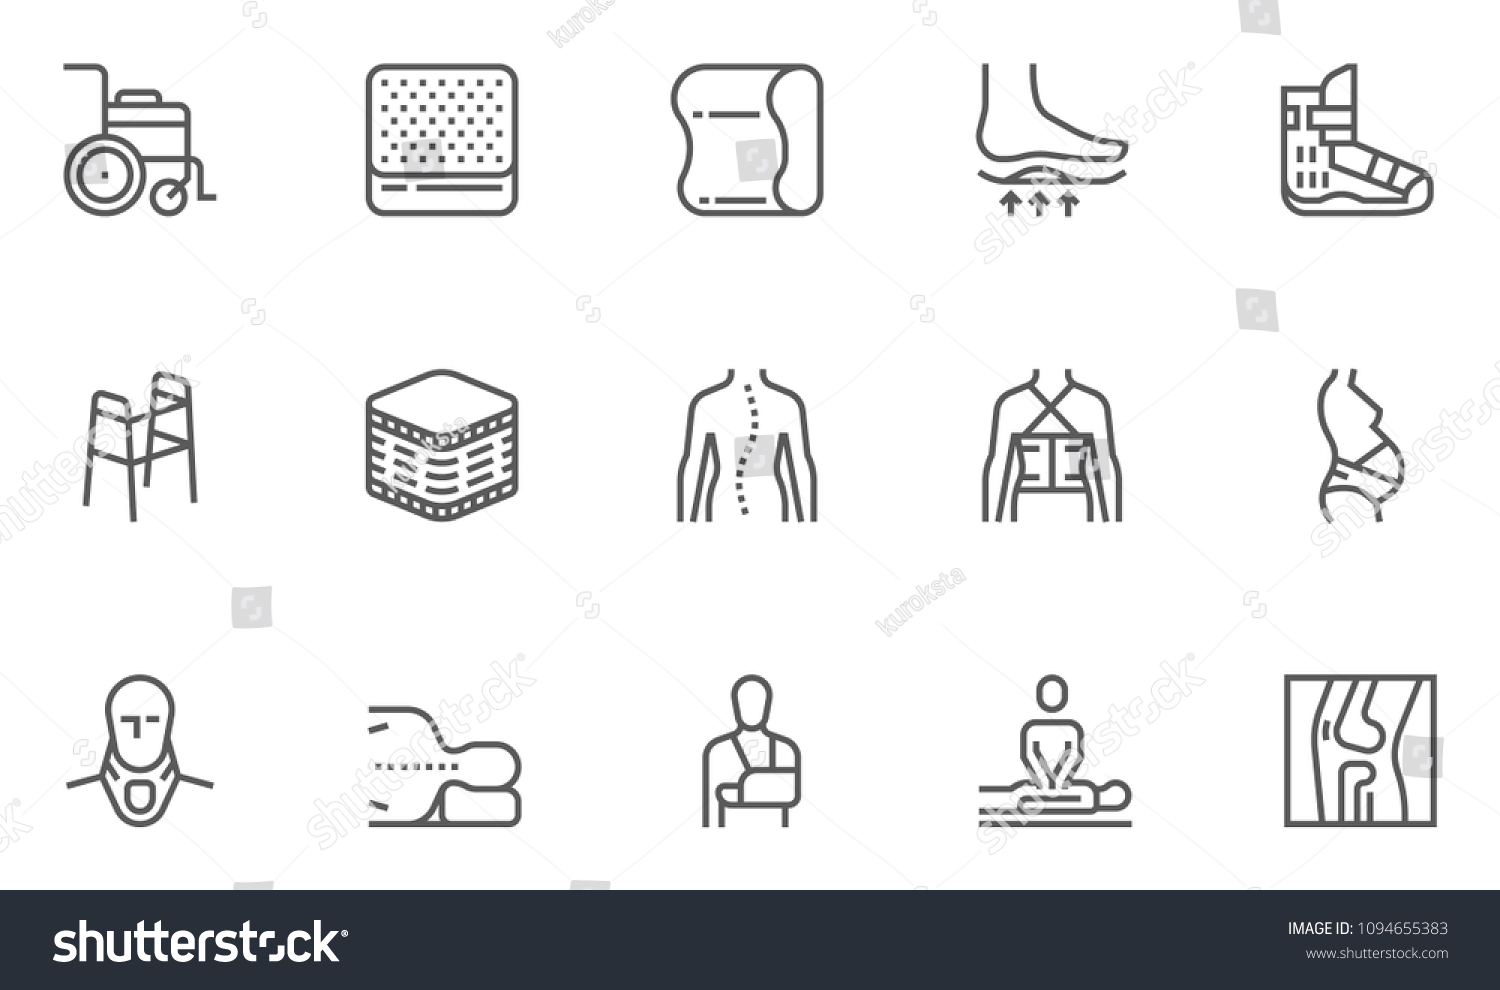 SVG of Orthopedic and trauma rehabilitation Vector Line Icons Set. Orthopedics Mattress Pillow, Cervical Collar, Walkers and Other Medical Rehab Goods. . Editable Stroke. 48x48 Pixel Perfect. svg